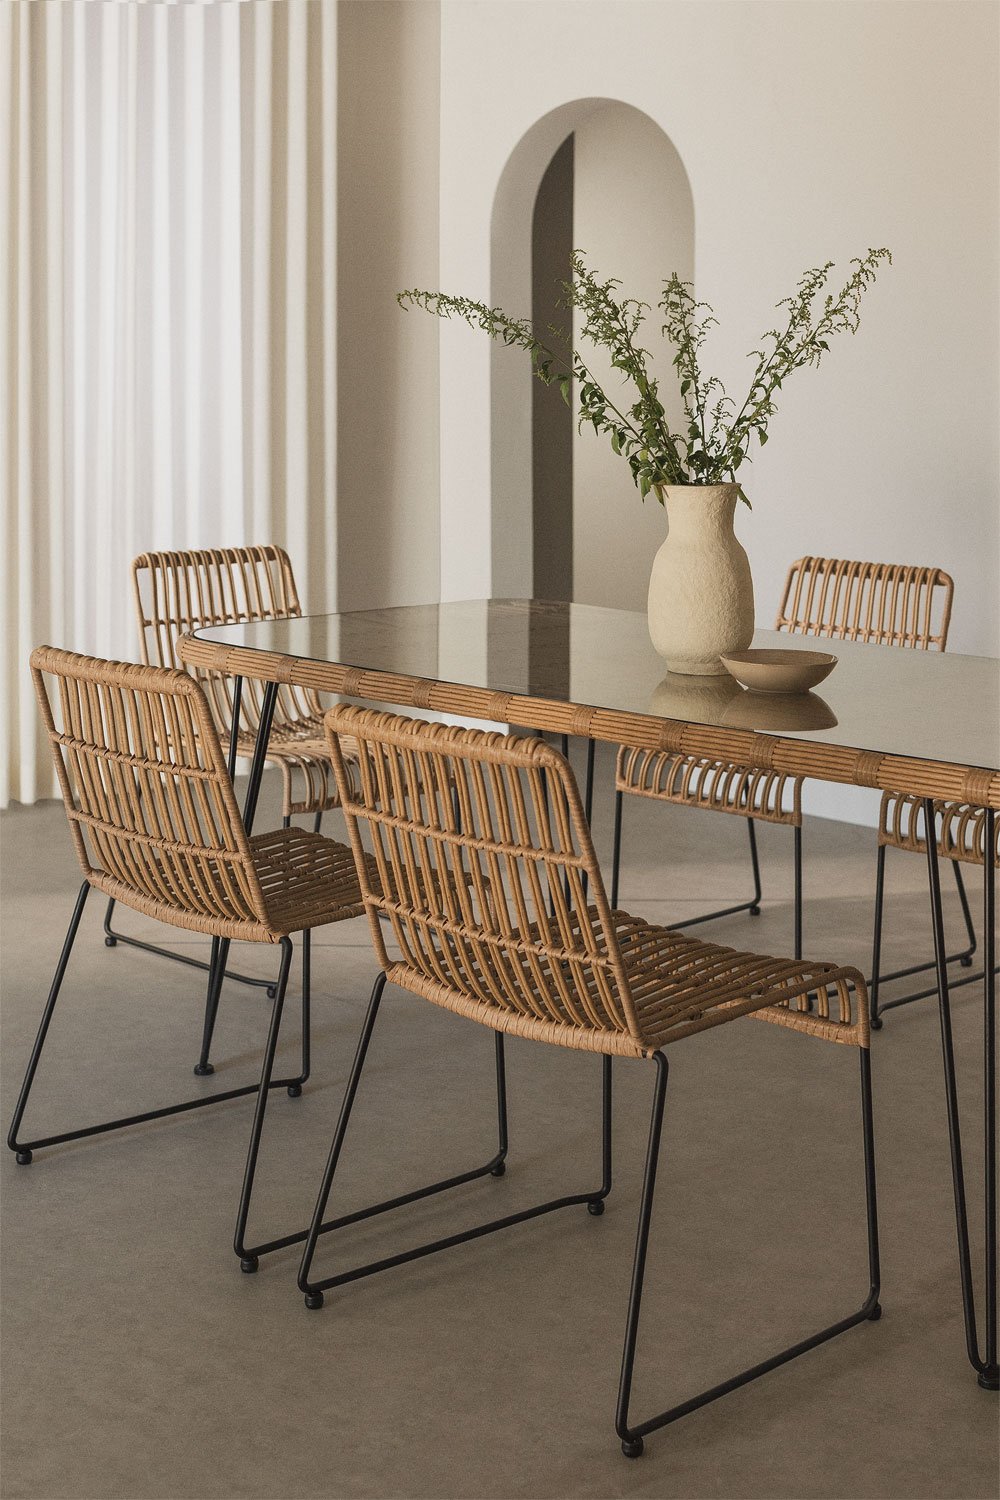 Set of Rectangular Synthetic Wicker Table (180x90 cm) Leribert and 6 Synthetic Rattan Dining Chairs Aroa , gallery image 1